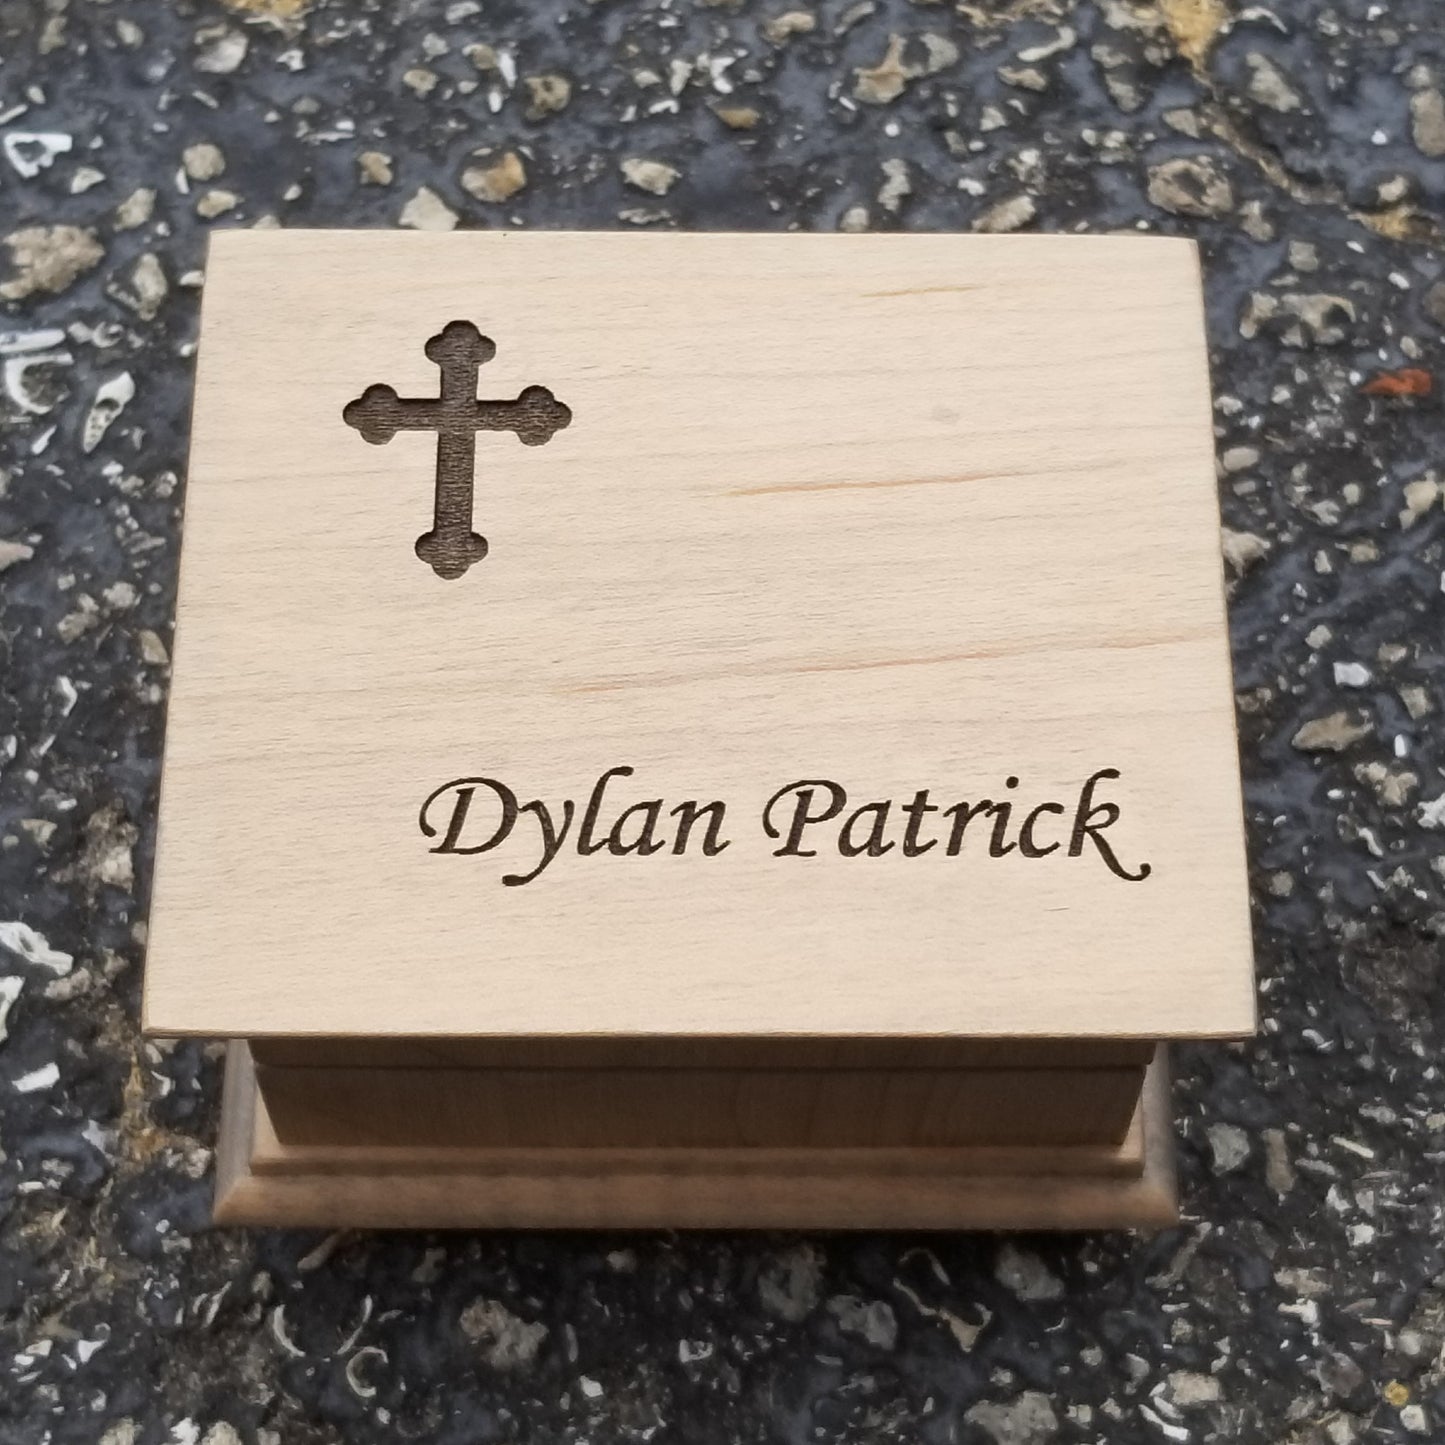 Christening Music Box custom engraved with name and a cross design on top, choose color and song